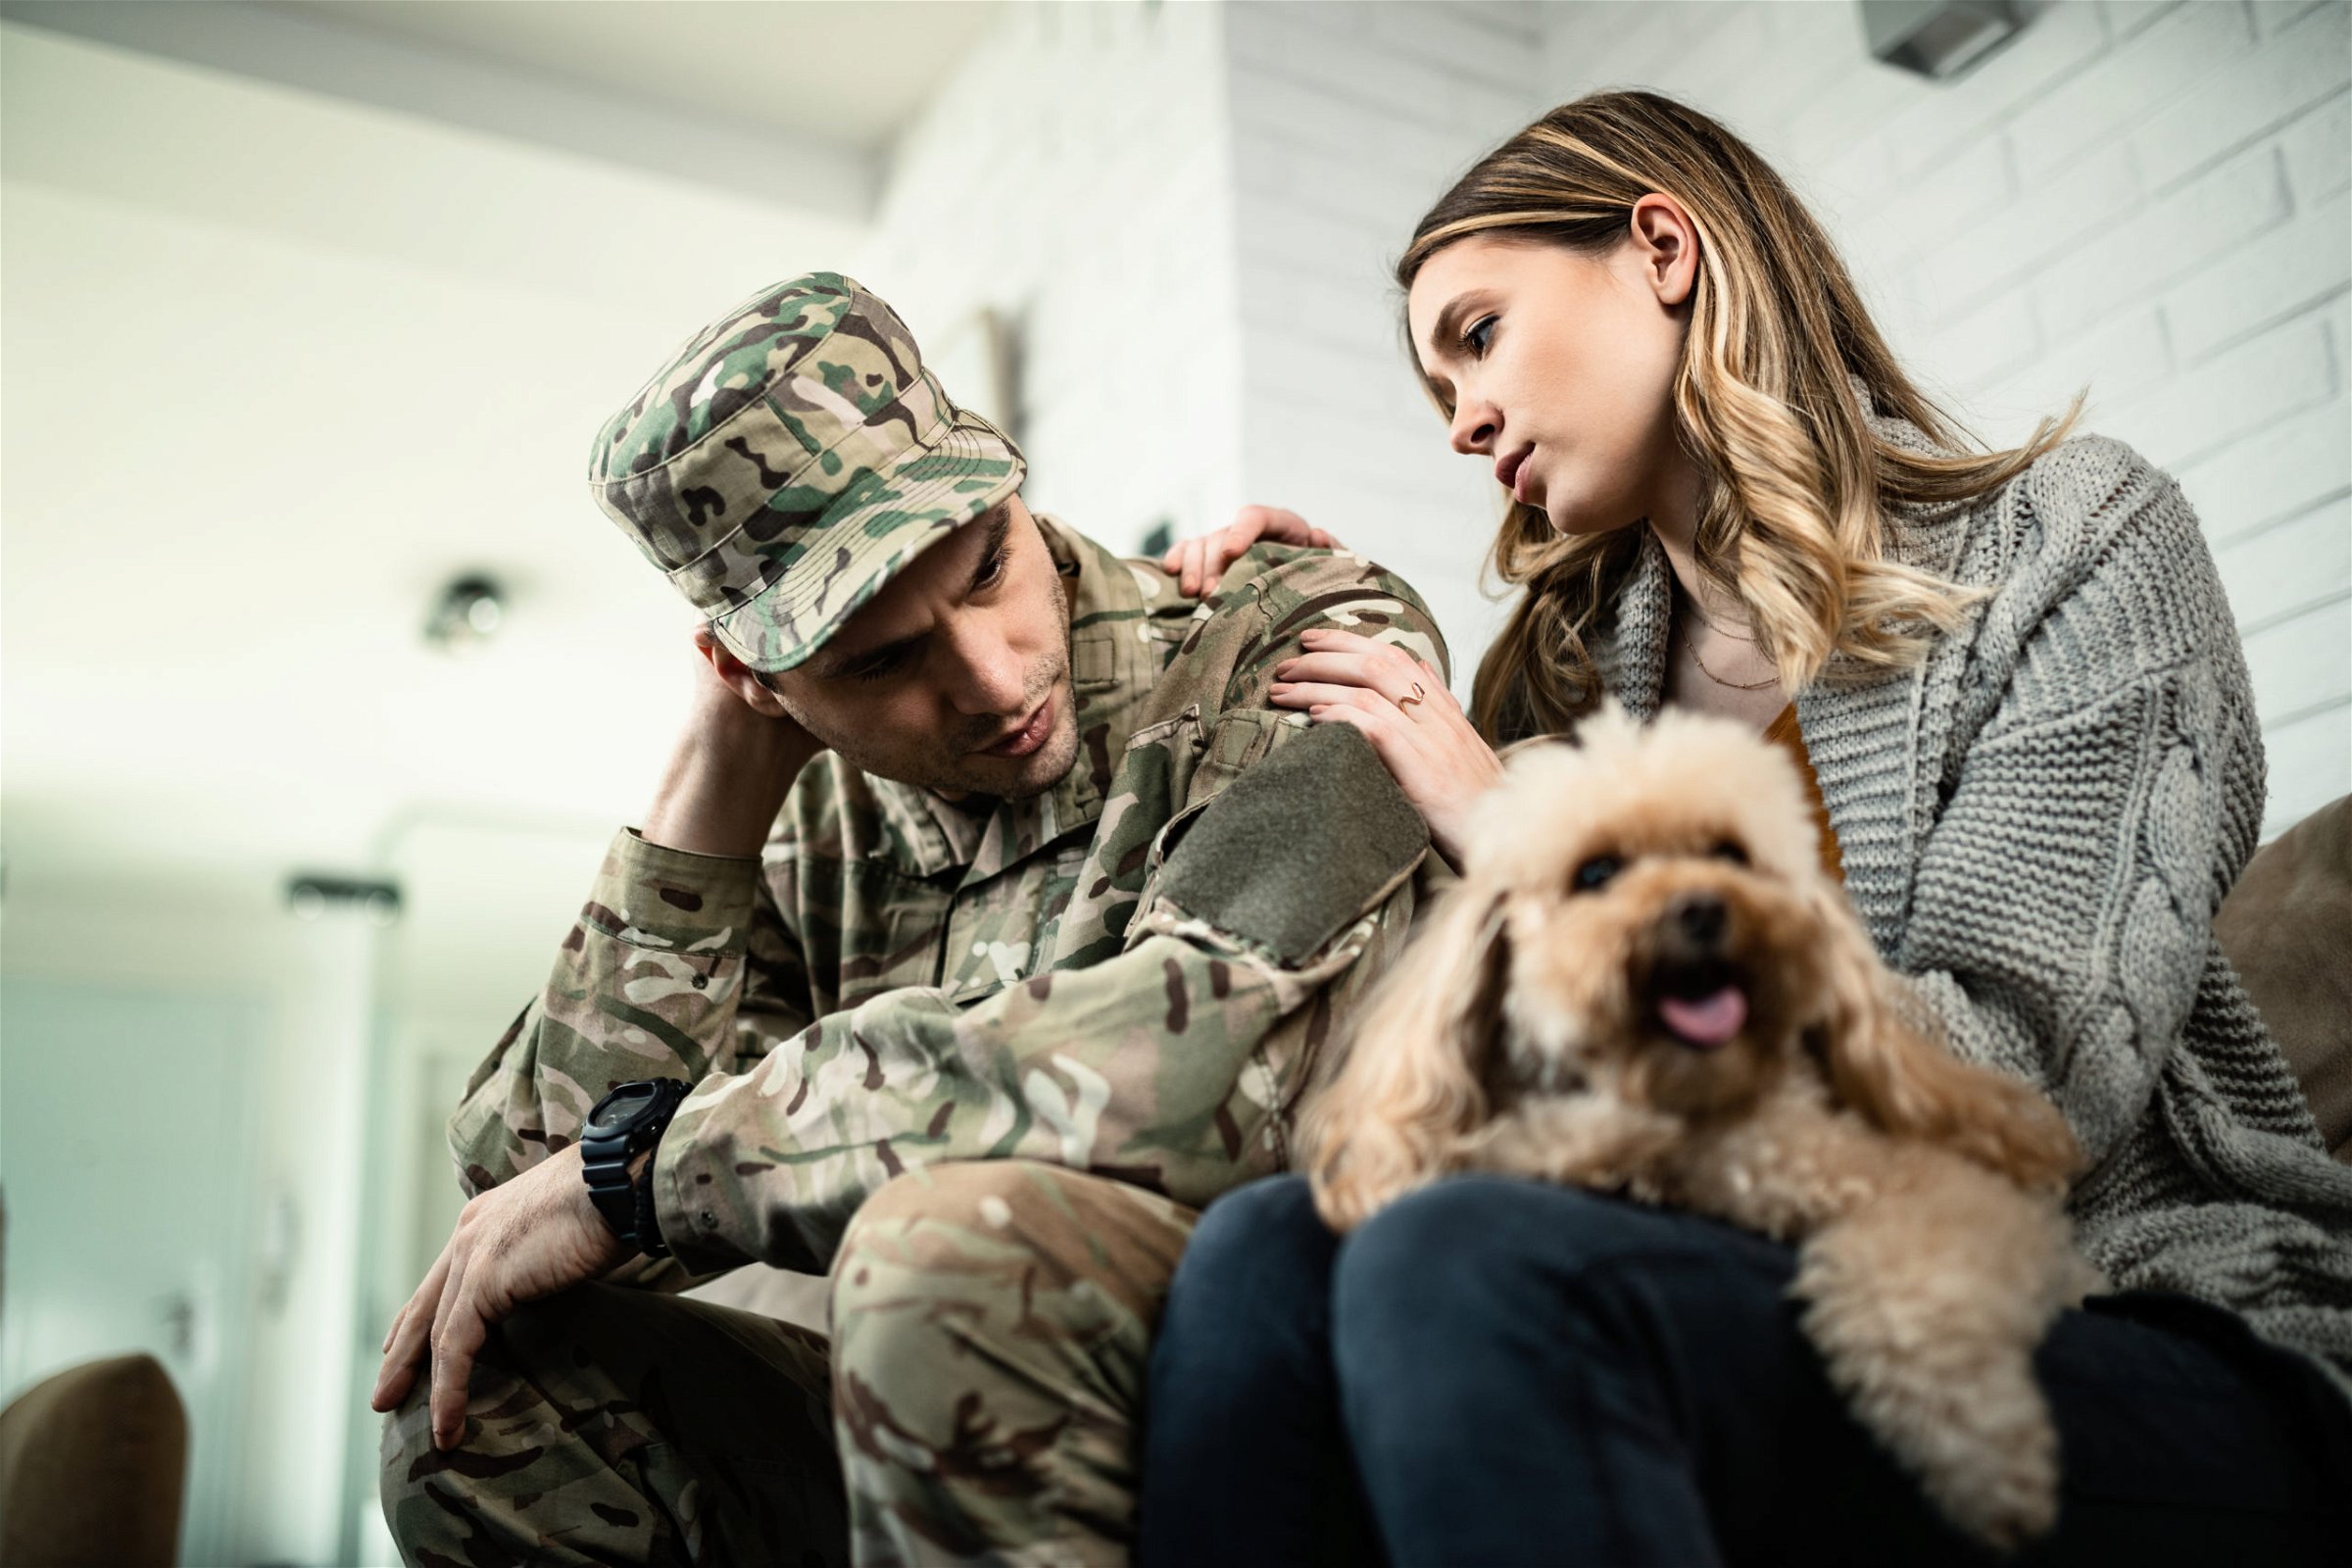 This federal law ensures that the former spouses of military members still have access to certain benefits, even if the couple divorces.